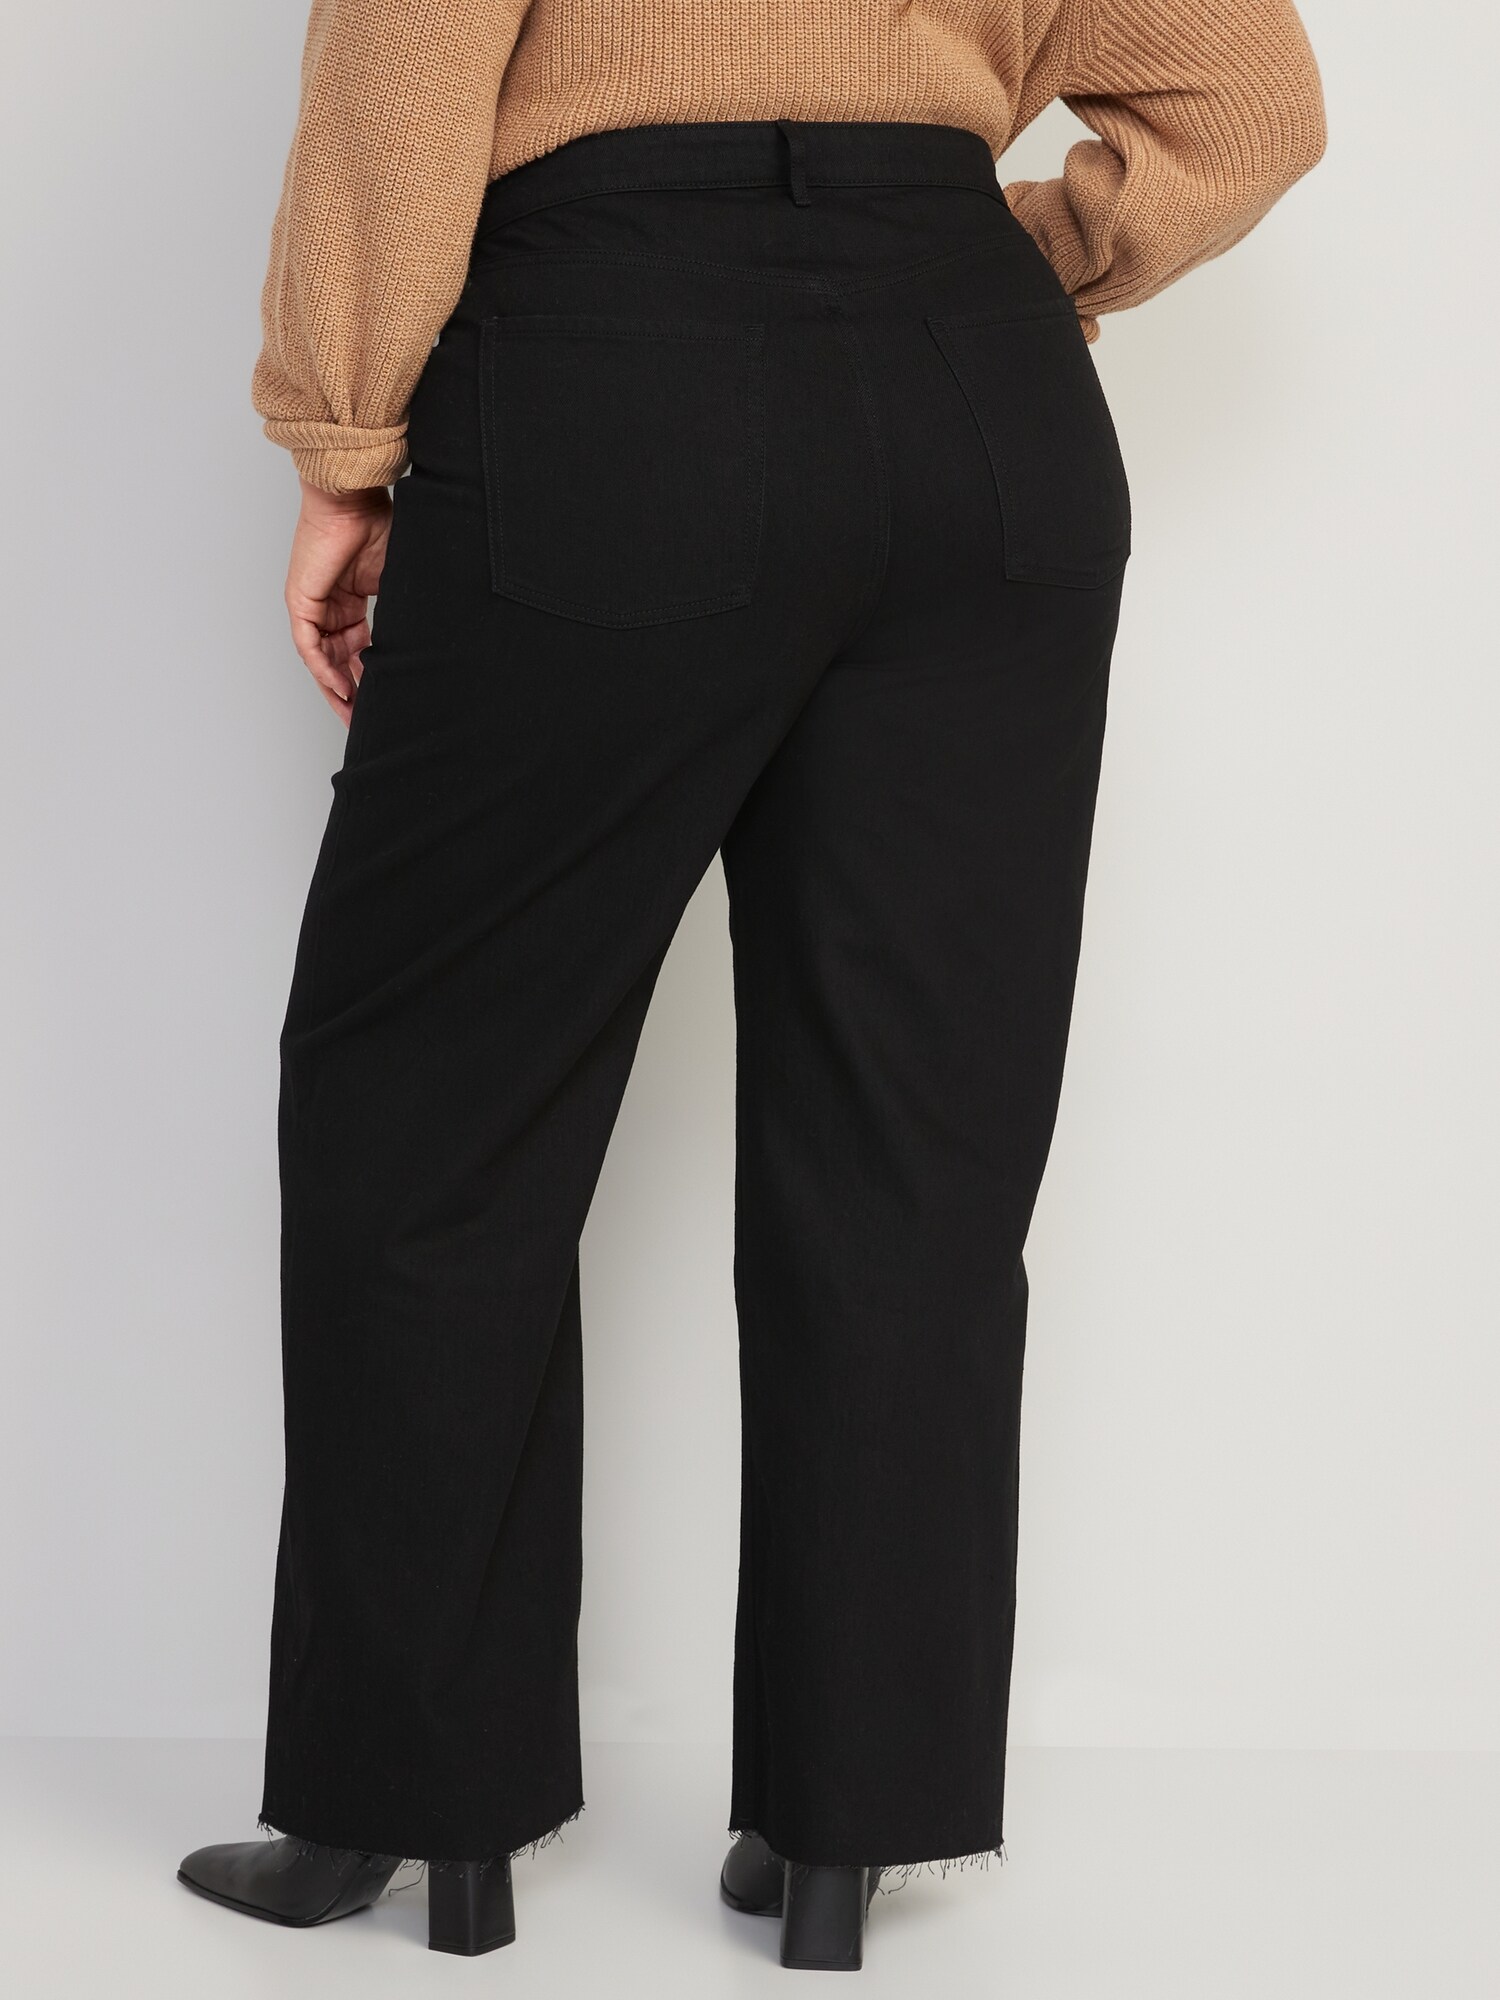 Buy Women's High Waist Tight-Fitting Hip-Length Pants Casual Stretch Jeans  (Black, Large) at